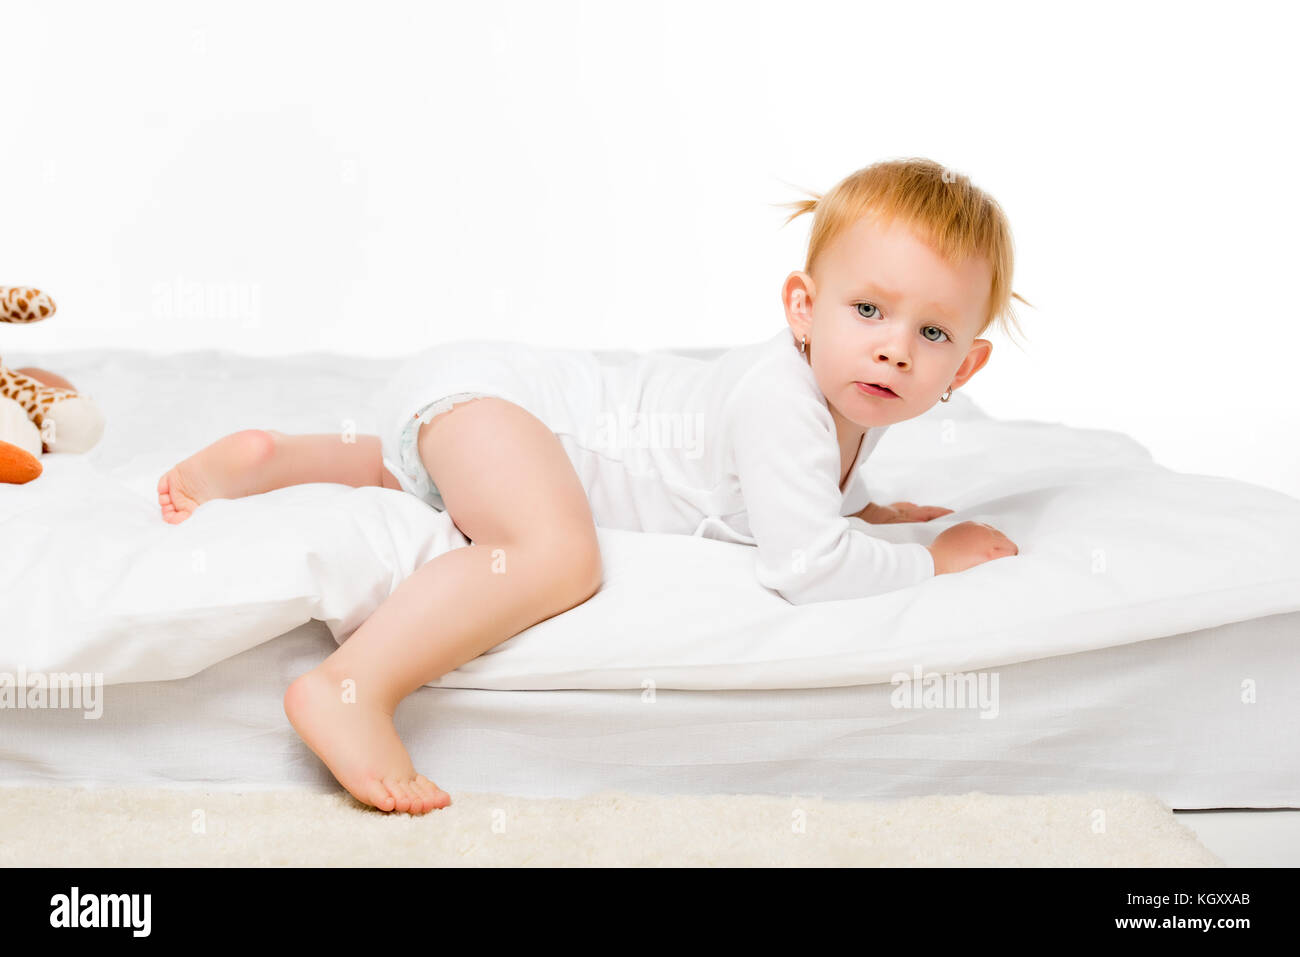 Baby lying on bed Banque D'Images